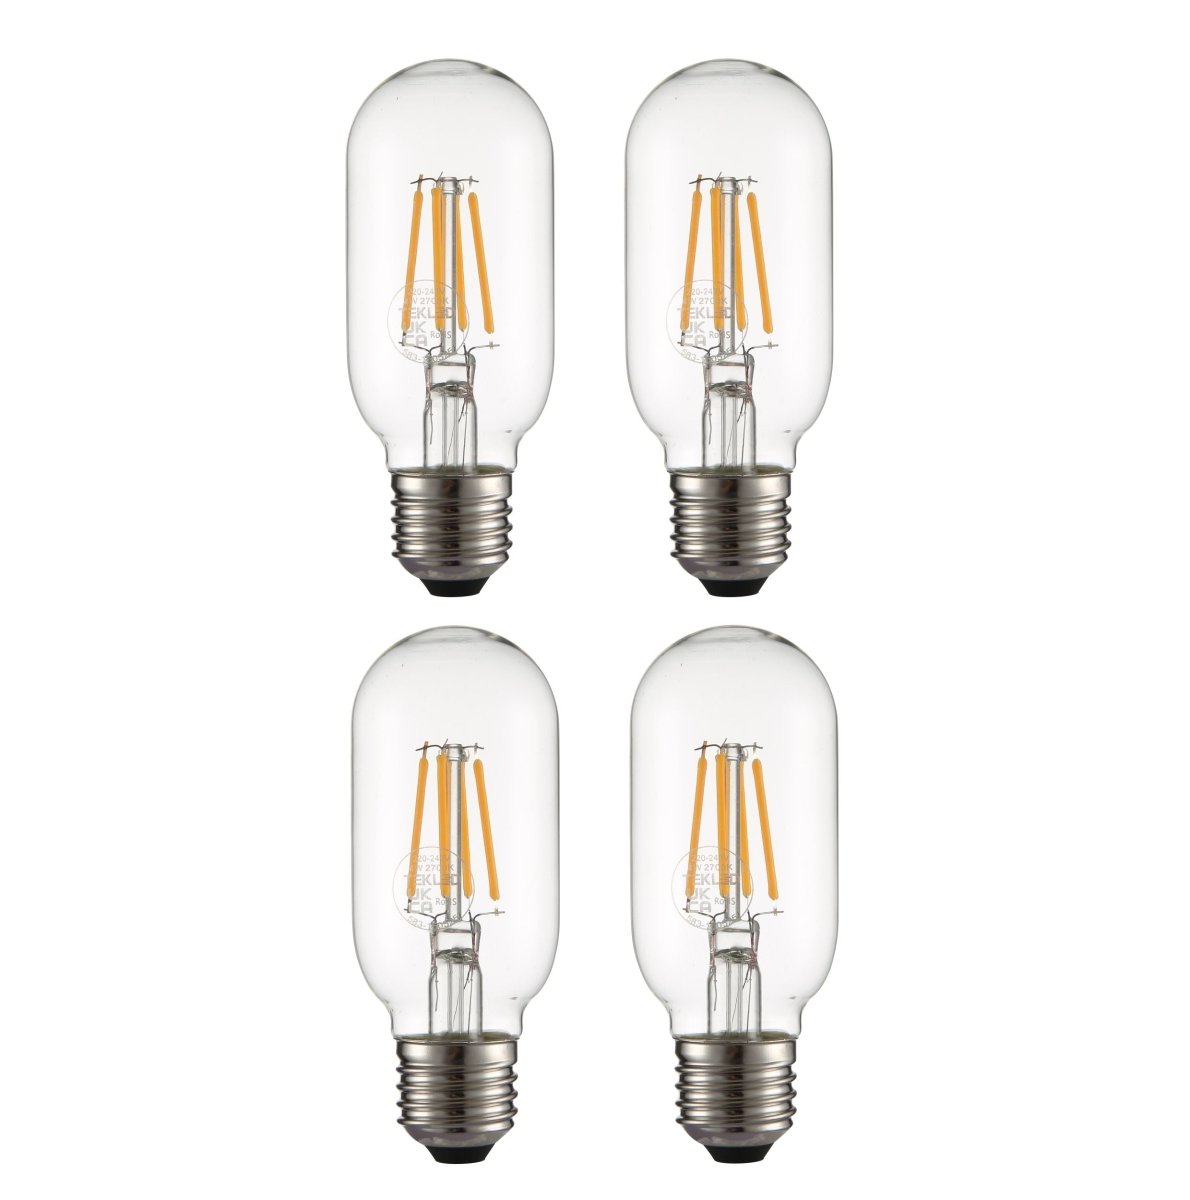 Main image of LED Dimmable Filament Bulb T45 Tubular E27 Edison Screw 4W 470lm Warm White 2700K Clear Pack of 4 | TEKLED 583-150525